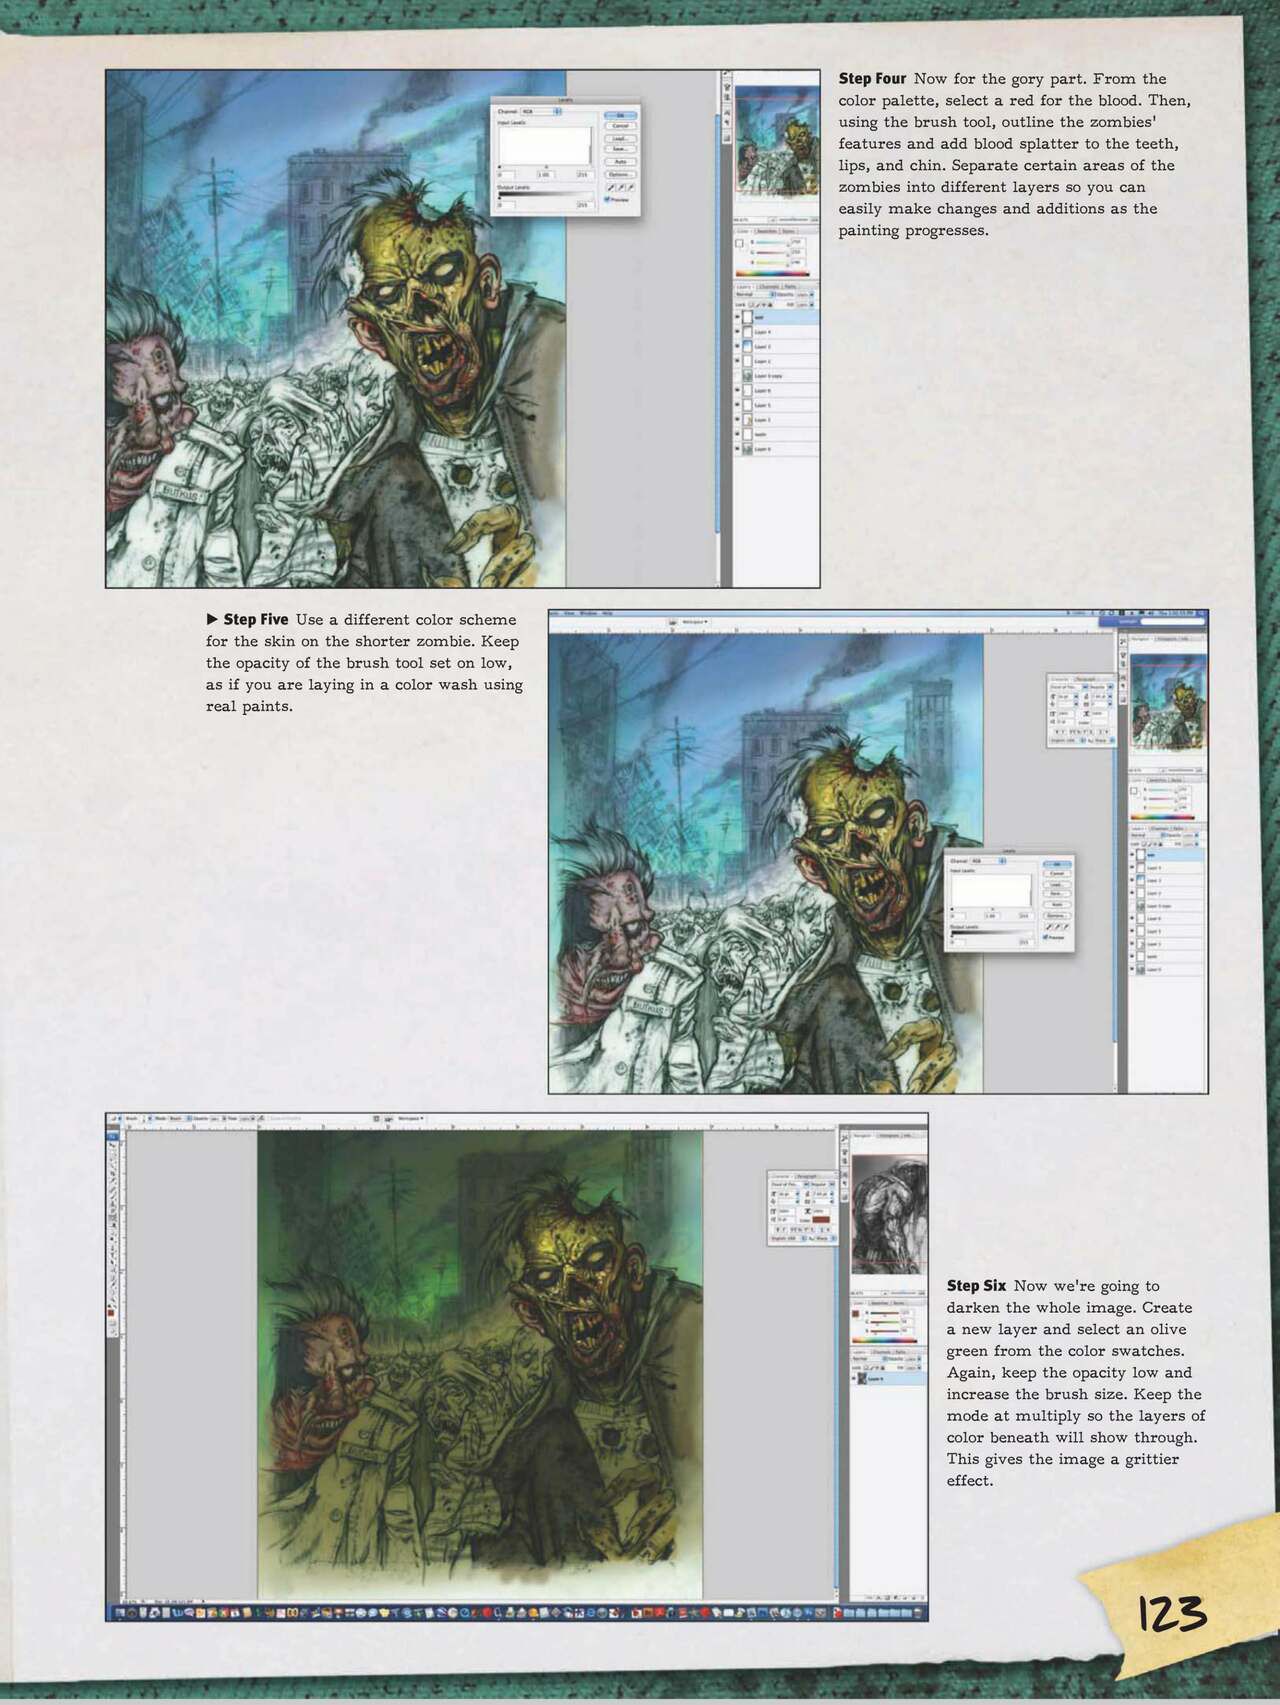 How to Draw Zombies: Discover the secrets to drawing, painting, and illustrating the undead 僵尸描绘集 124